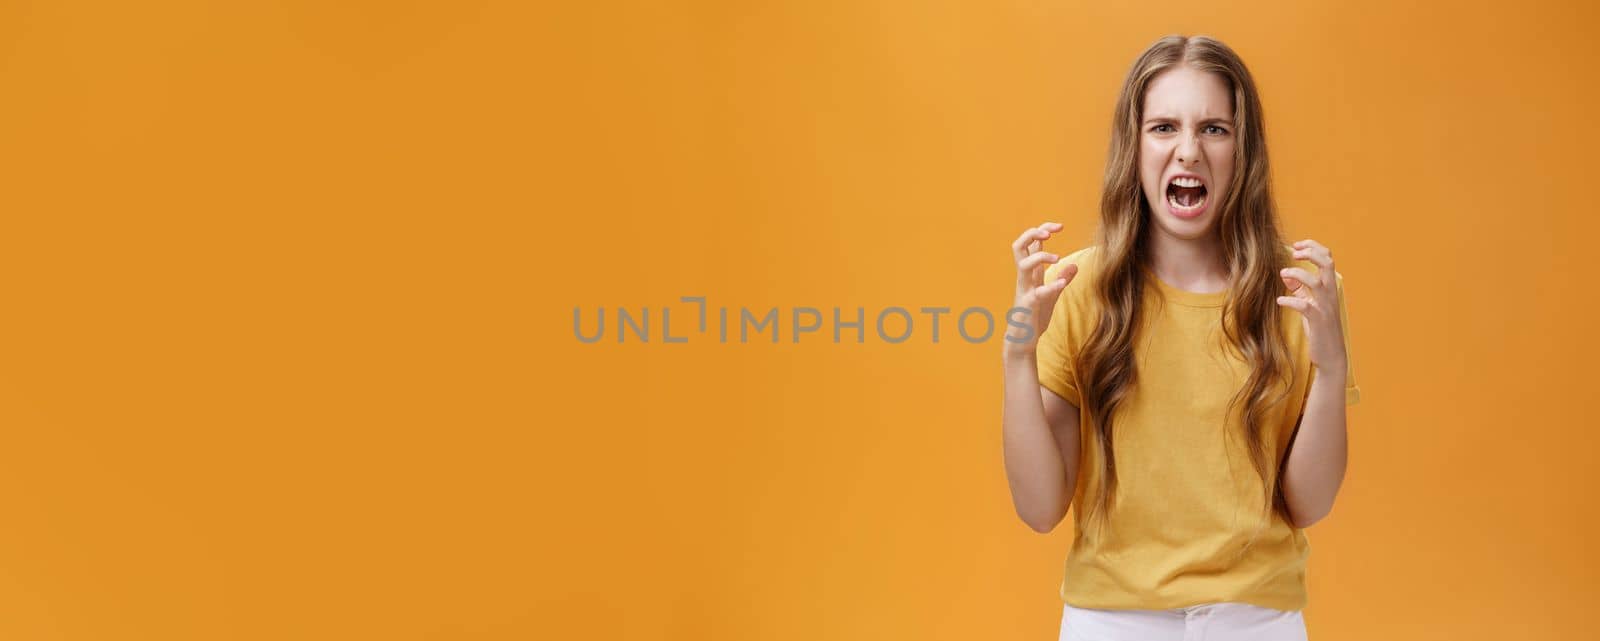 Portrait of irritated cute european female squeezing hands in fists with anger frowning and making hateful face standing annoyed and pissed over orange background with furious look. Emotions concept